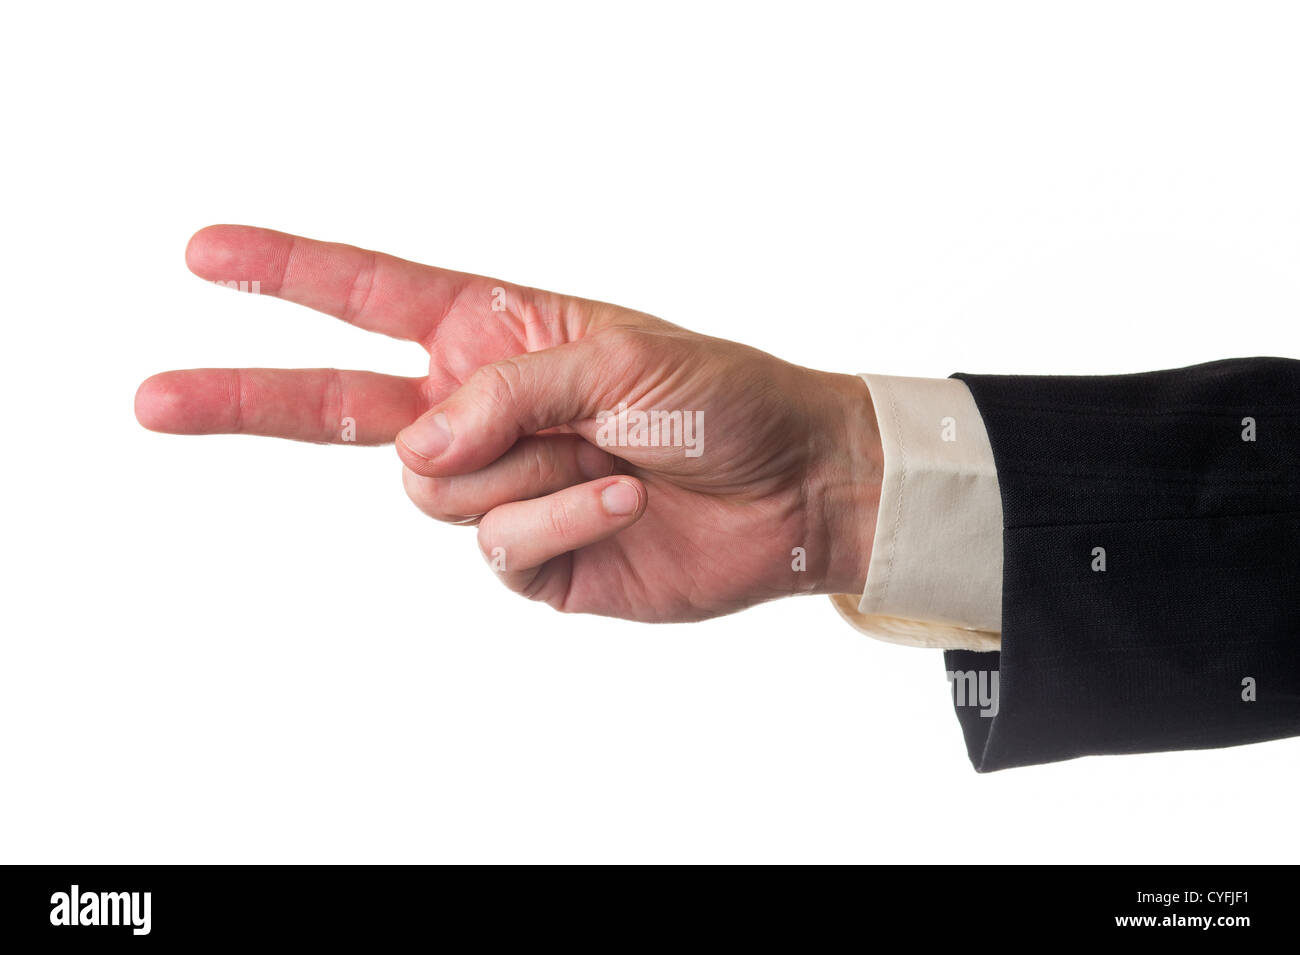 Man showing two fingers, suit sleeve and white isolated background. Stock Photo